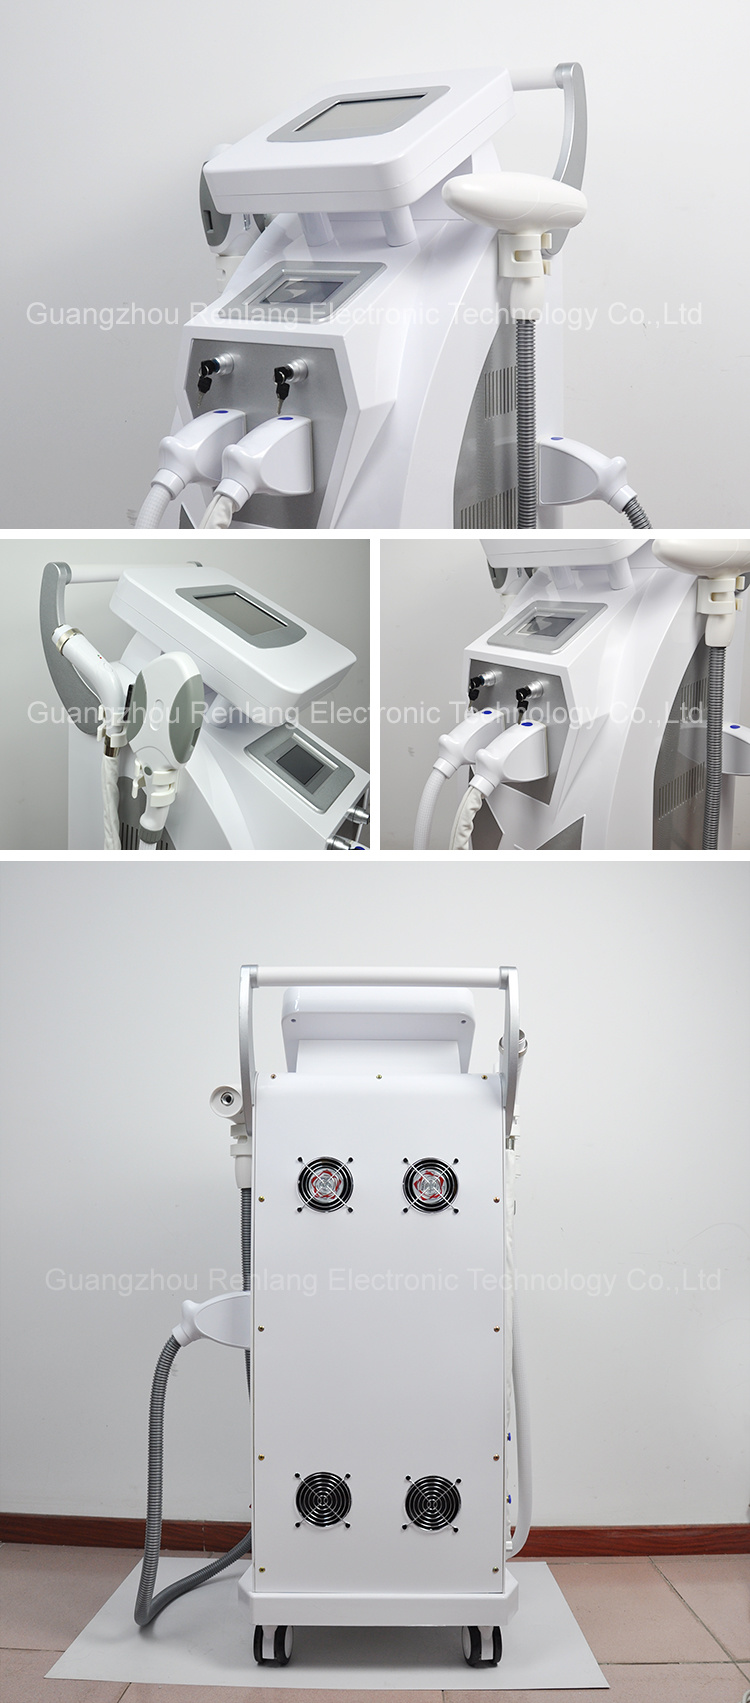 IPL / RF / Laser Multi Beauty System Machine for Hair Removal / Skin Tightening / Tattoo Removal